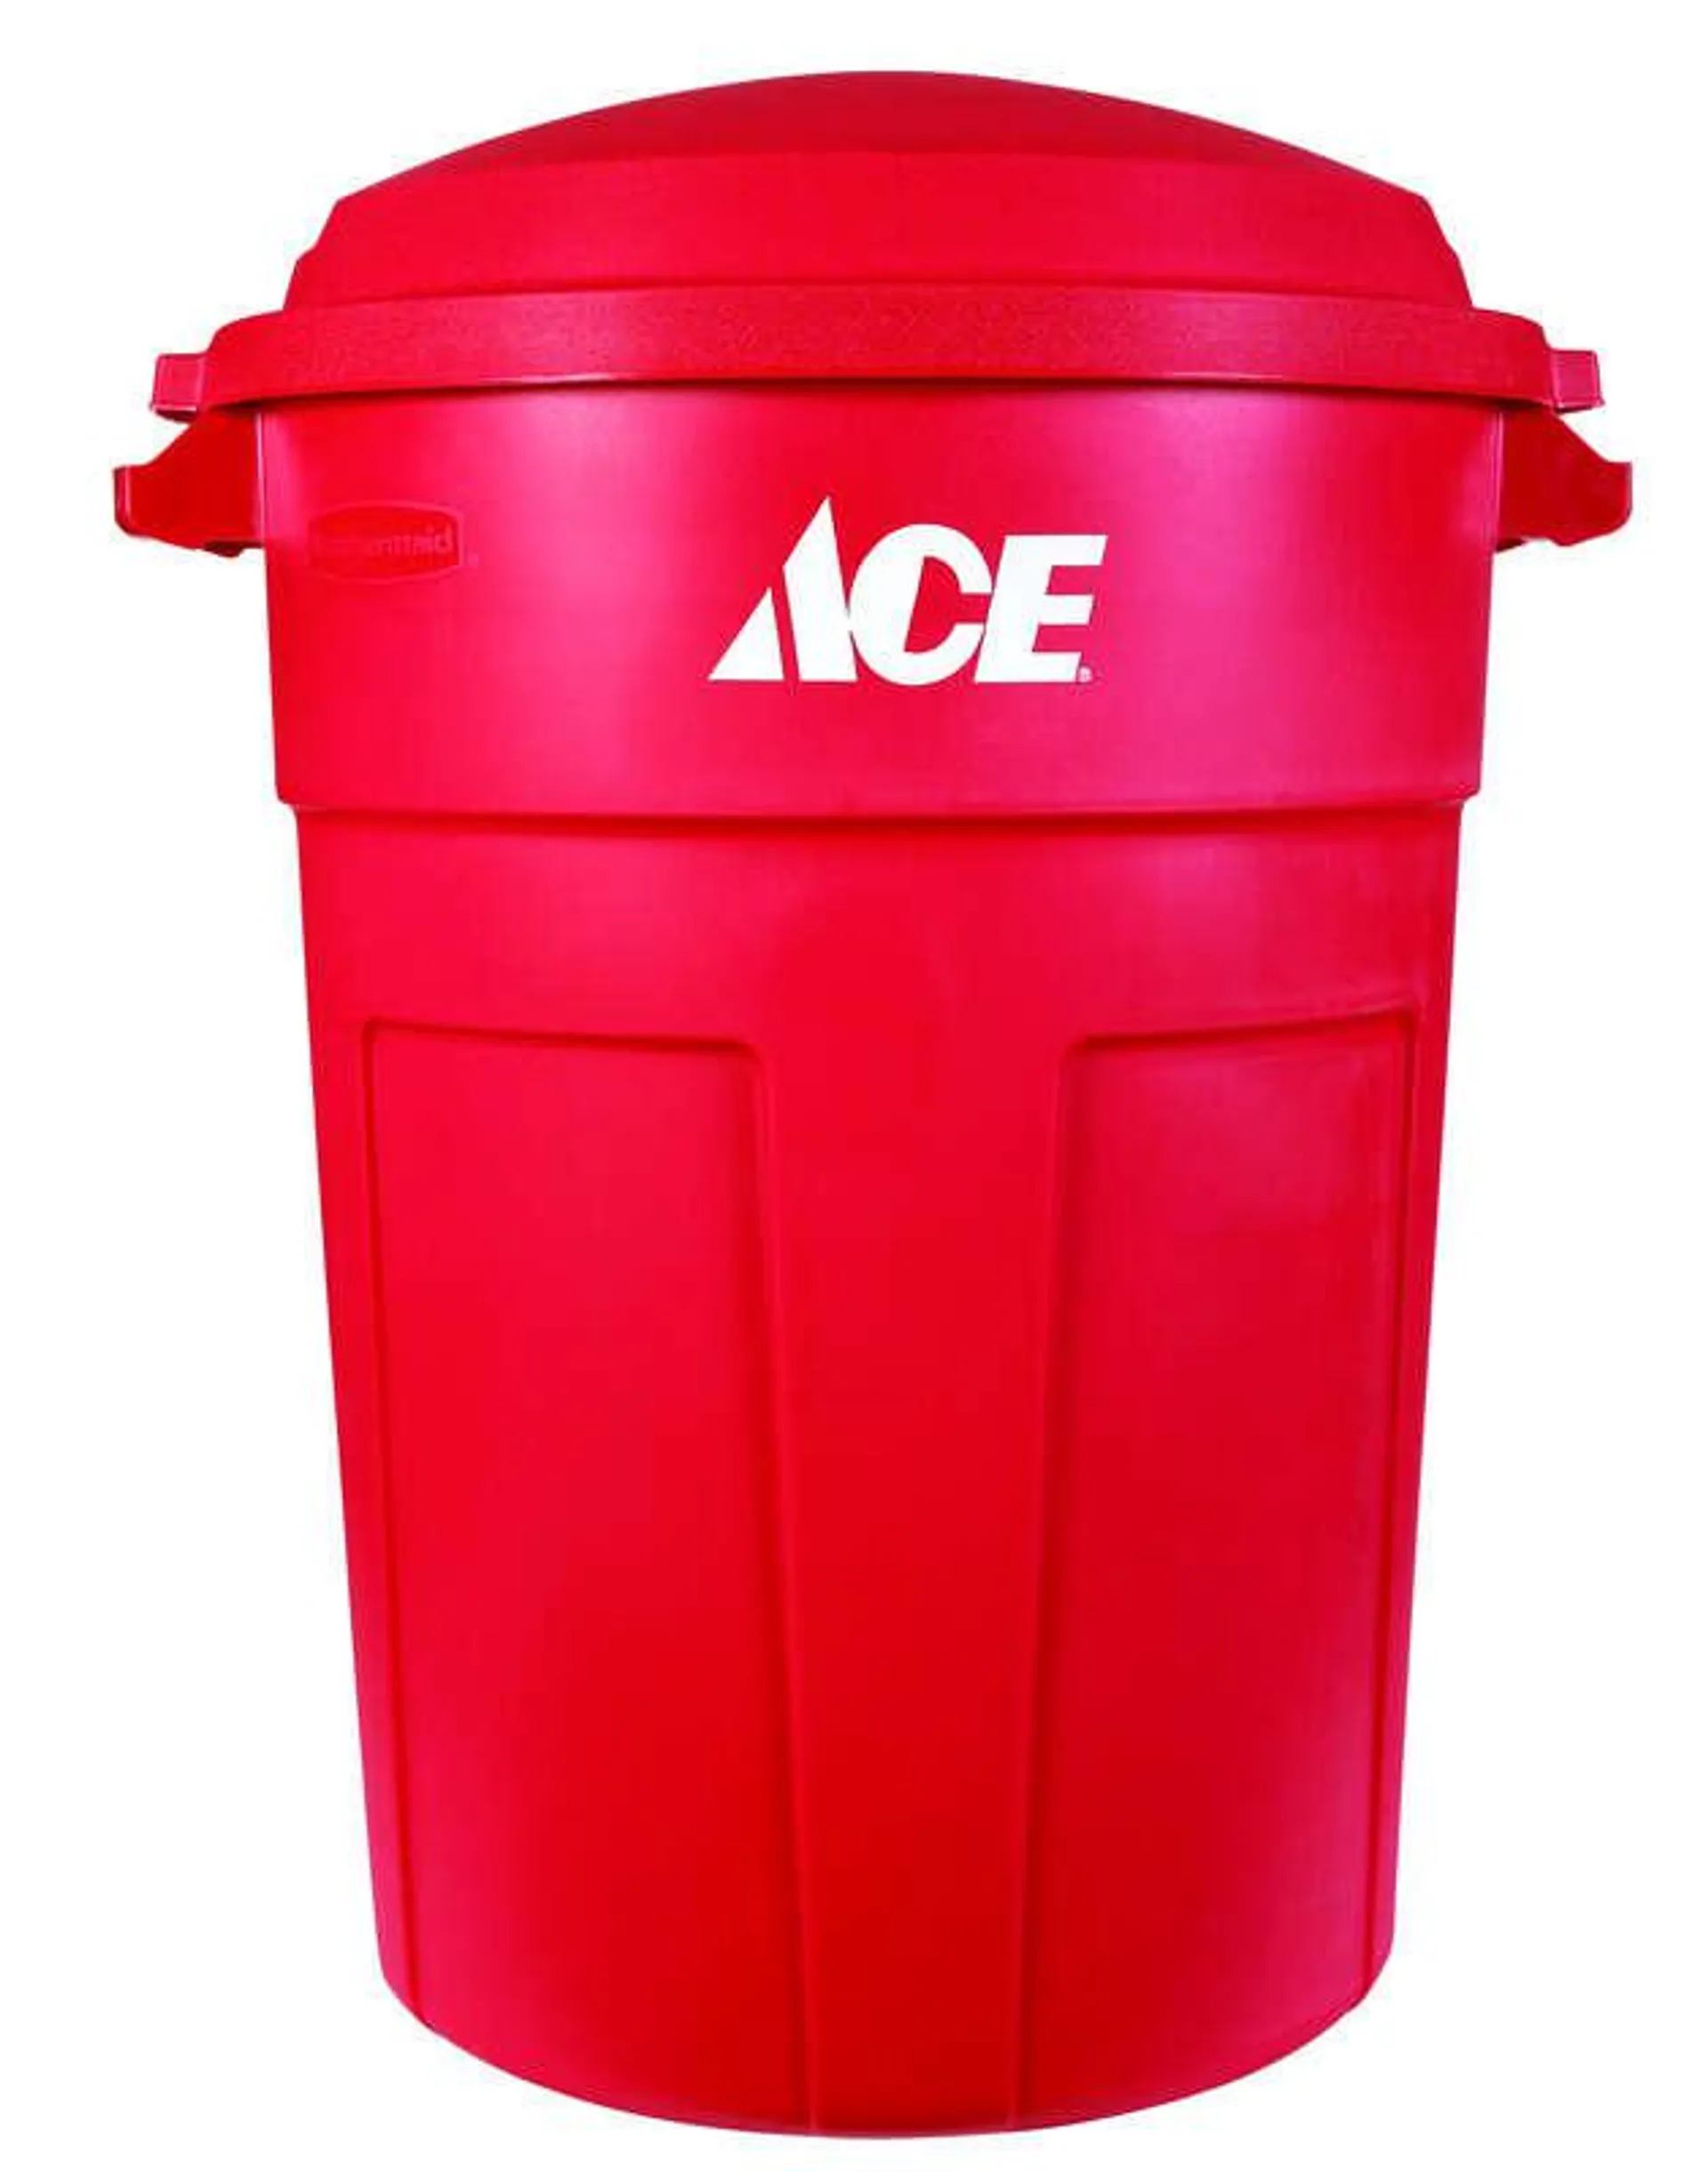 Ace 32 gal Red Plastic Garbage Can Lid Included